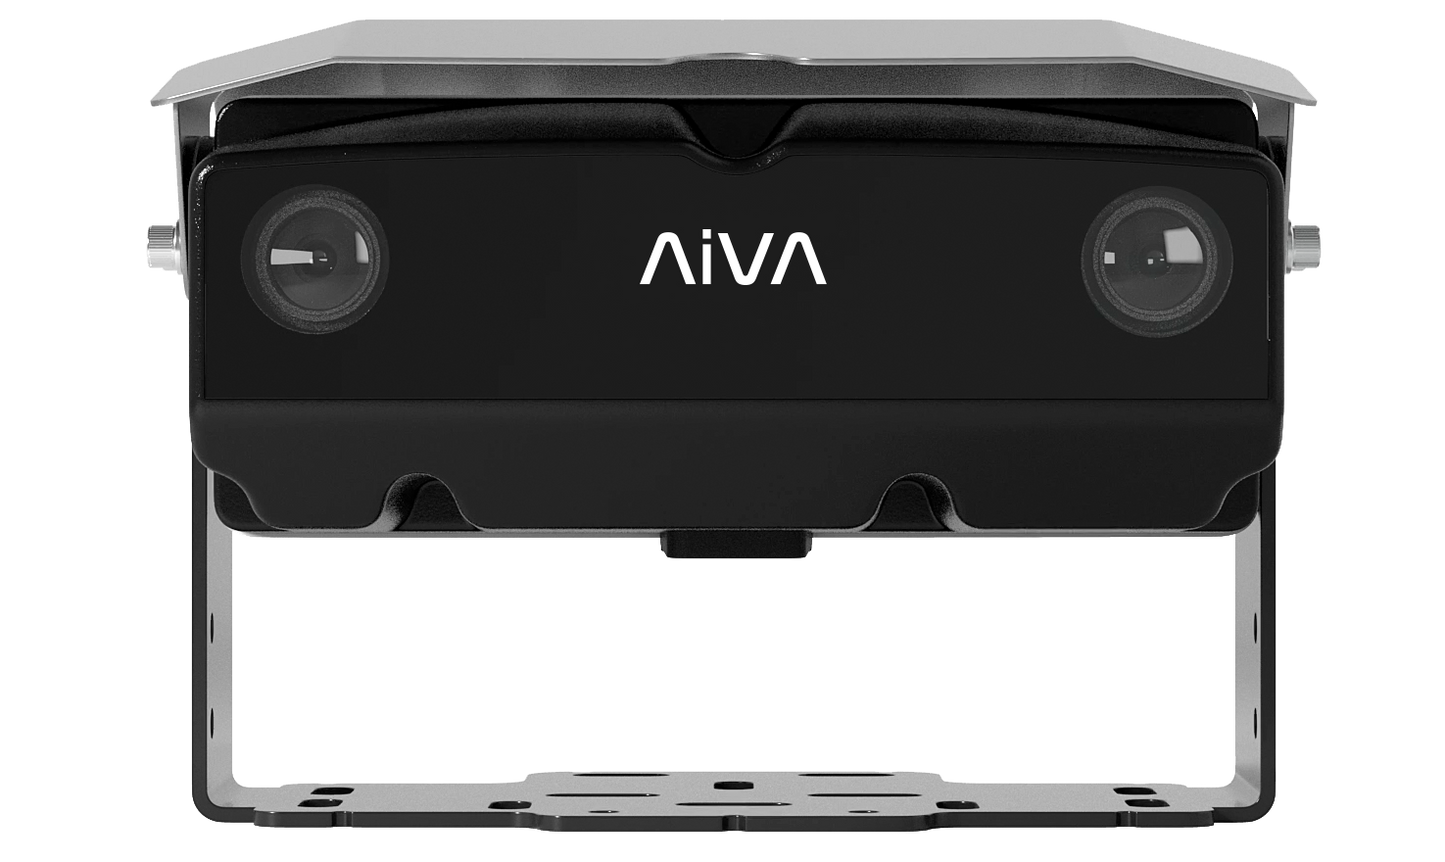 AiVA Camera Front View - Pedestrian Detection System